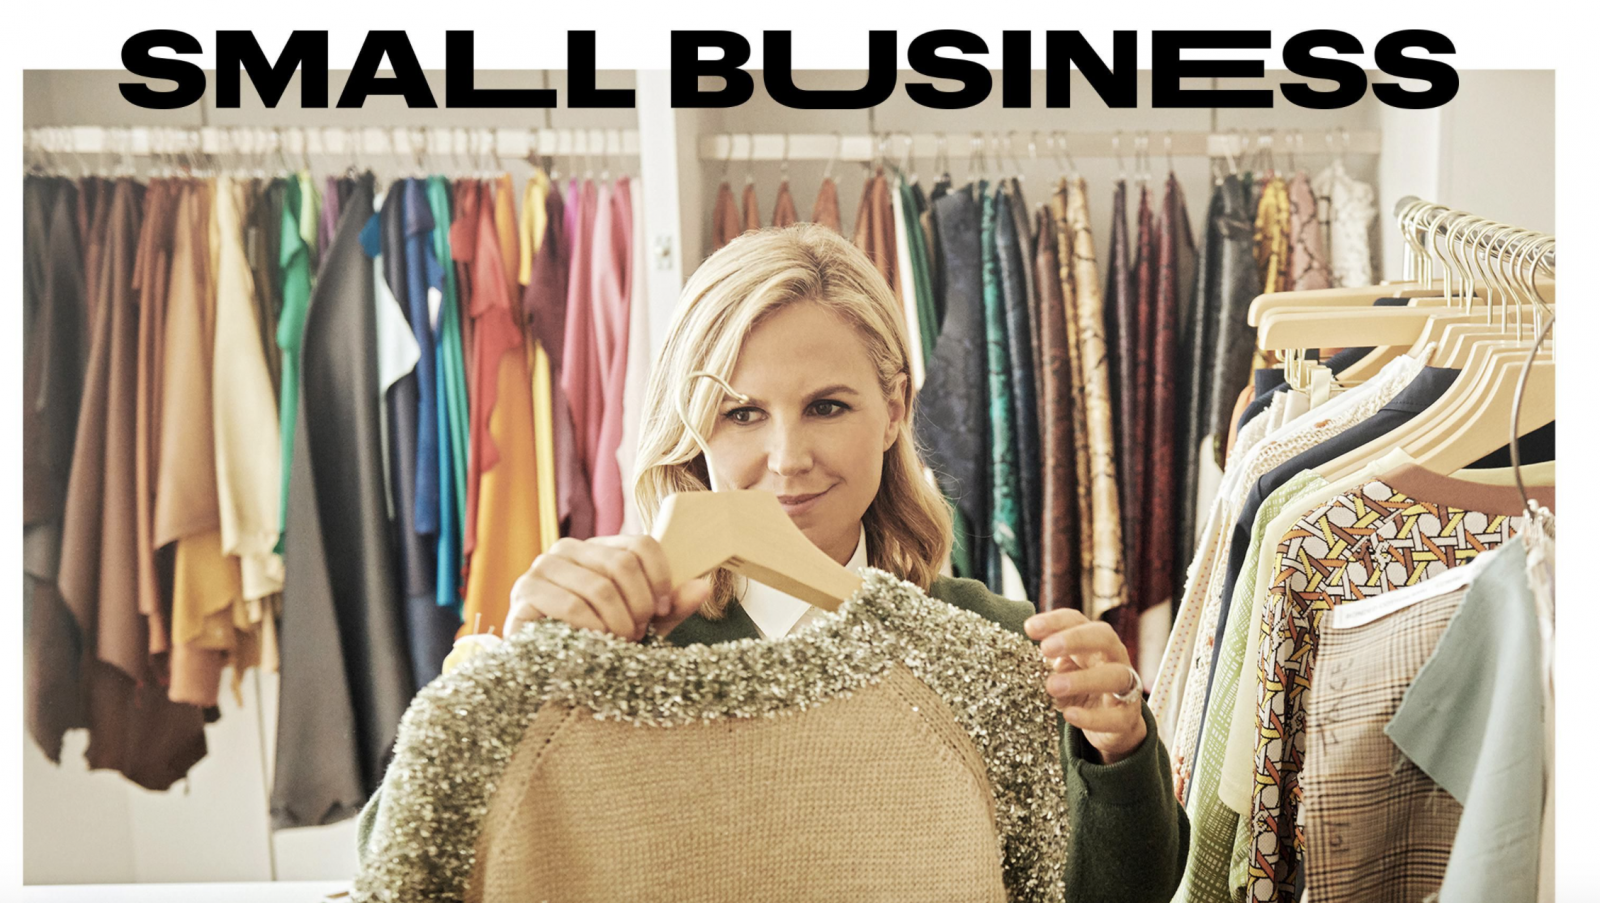 Forbes Small Business Awards 2020: Tory Burch Is Paying It Forward 